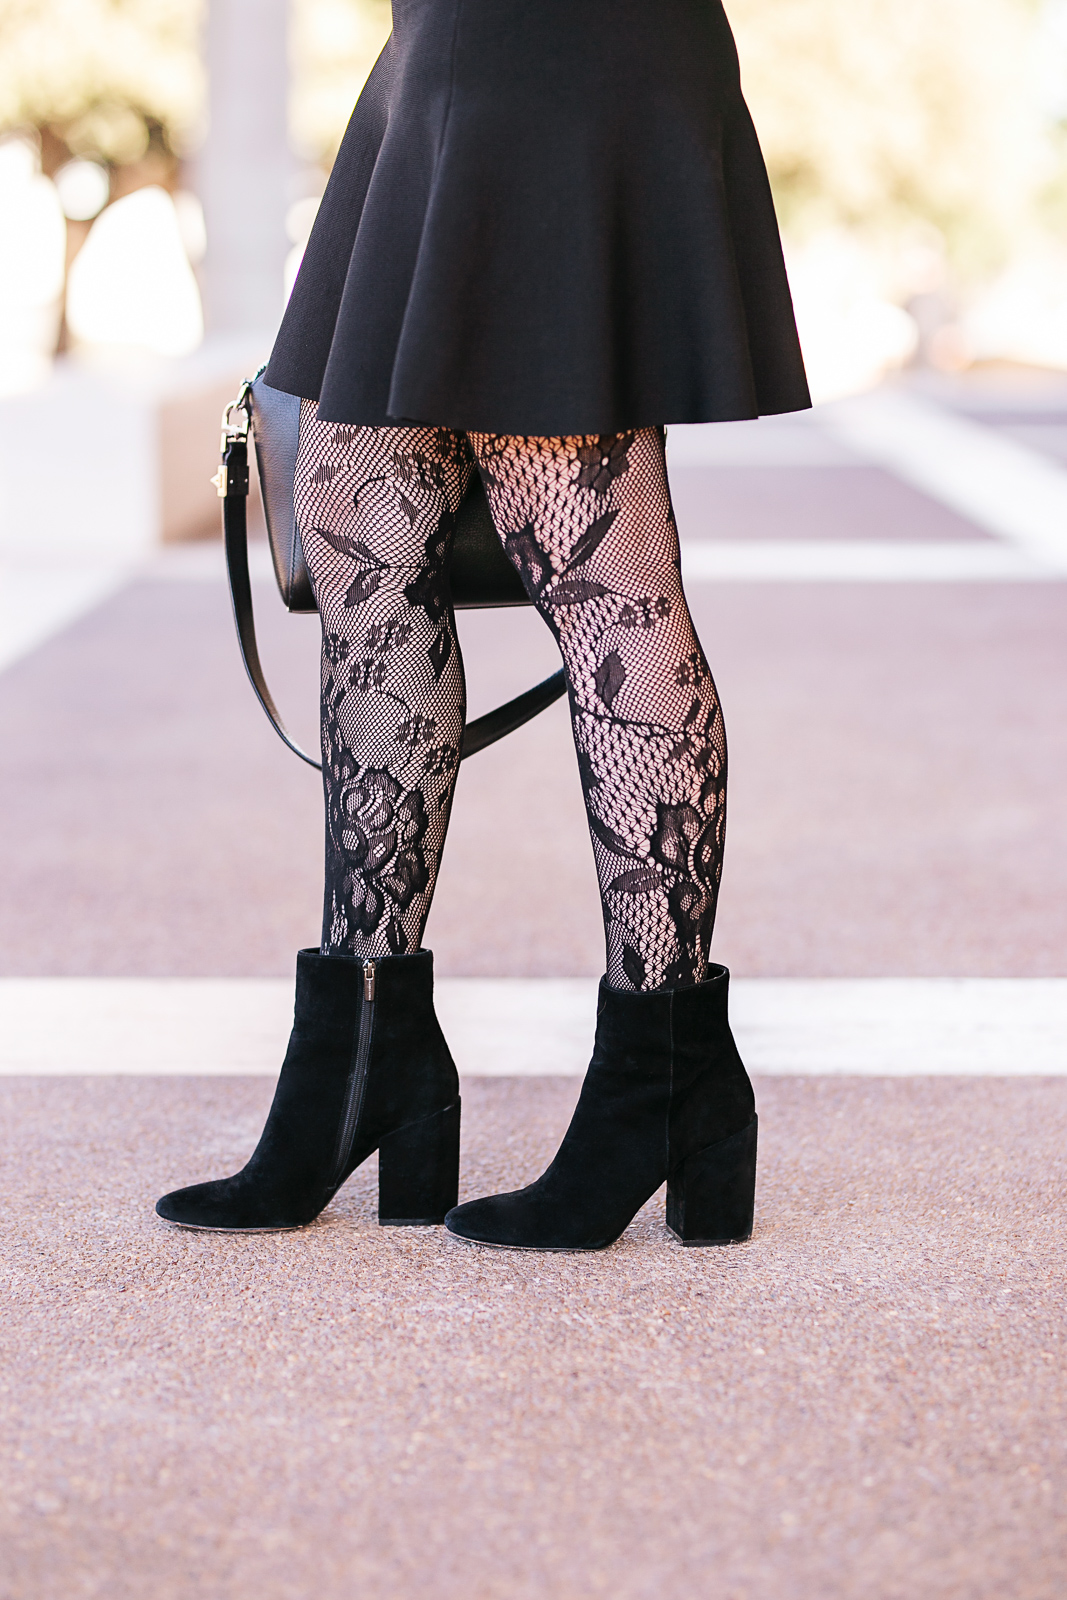 HOW TO WEAR PATTERNED TIGHTS LIKE A PRO